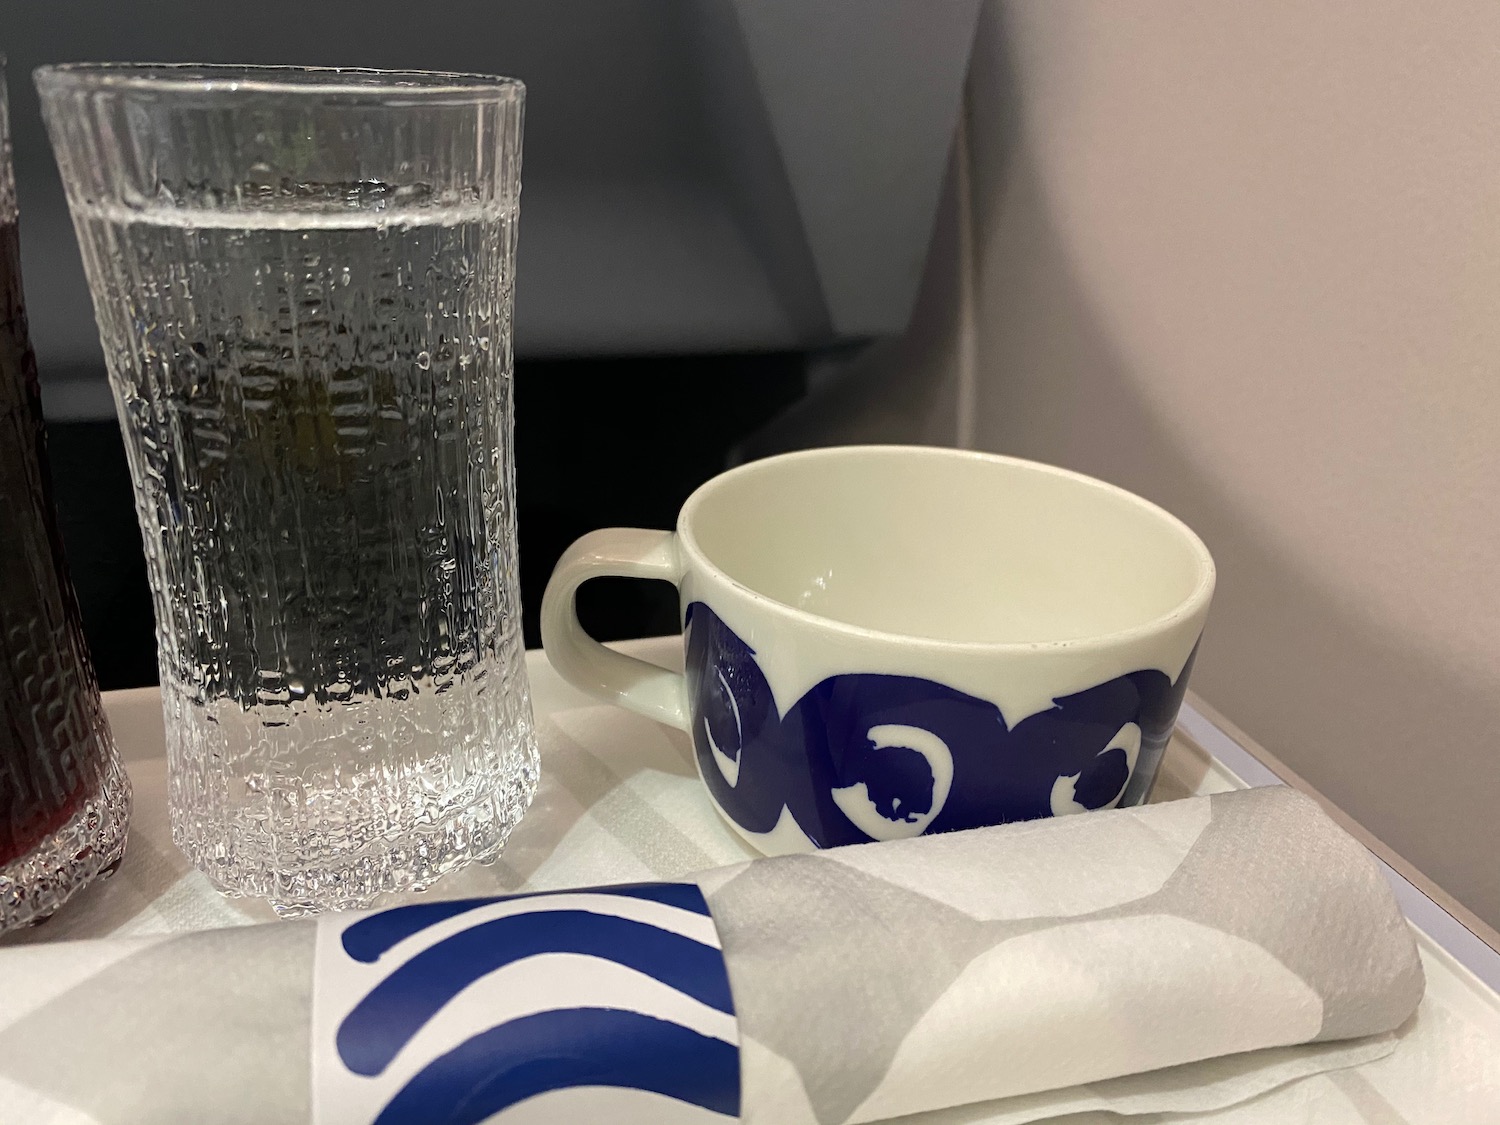 a cup and a glass of water on a tray